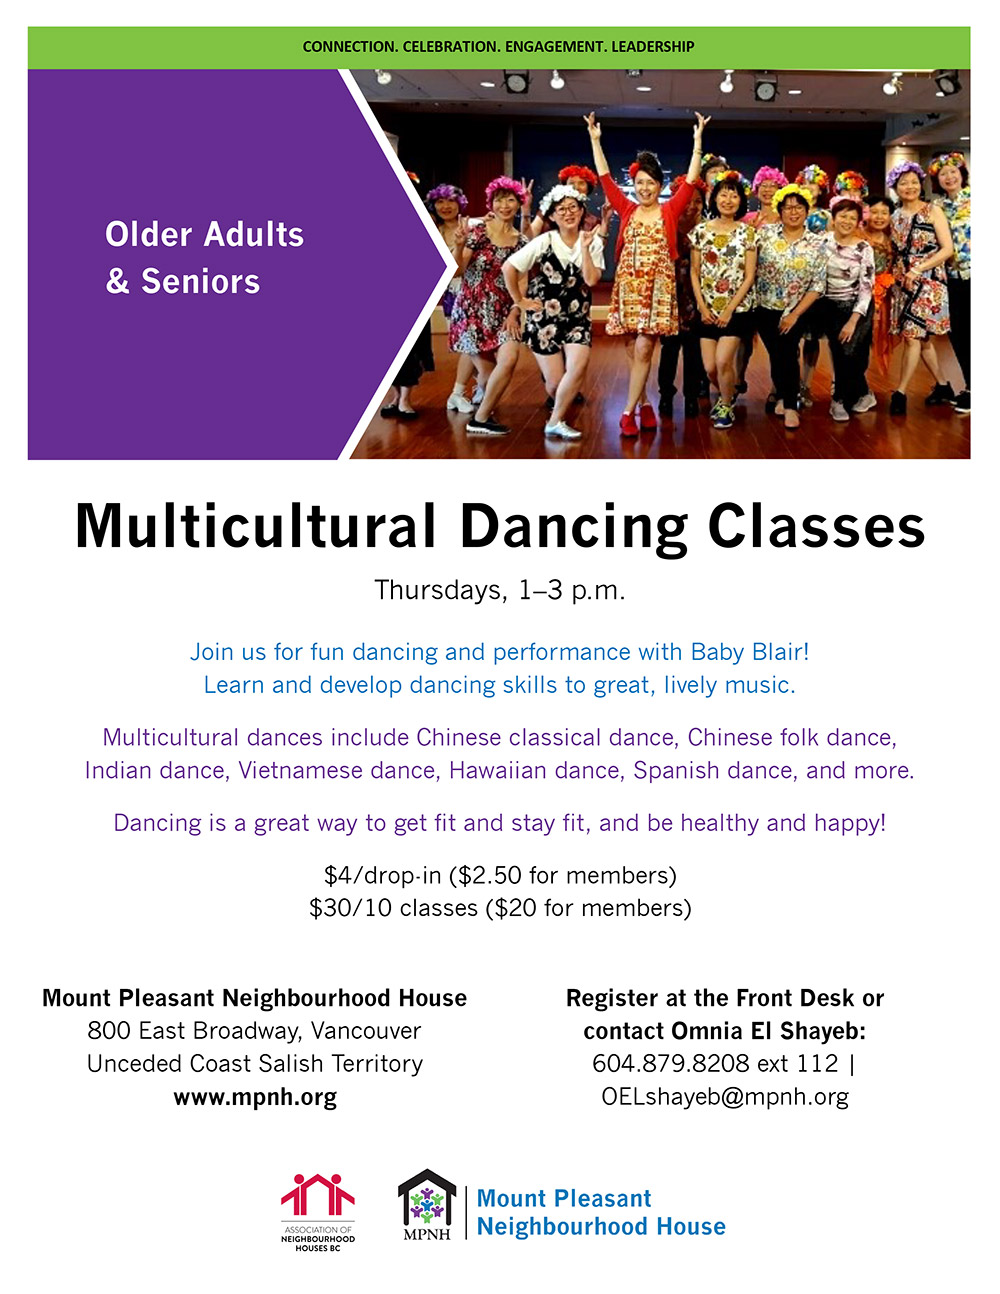 Poster for the multicultural dancing classes showing a group of women dancing and smiling